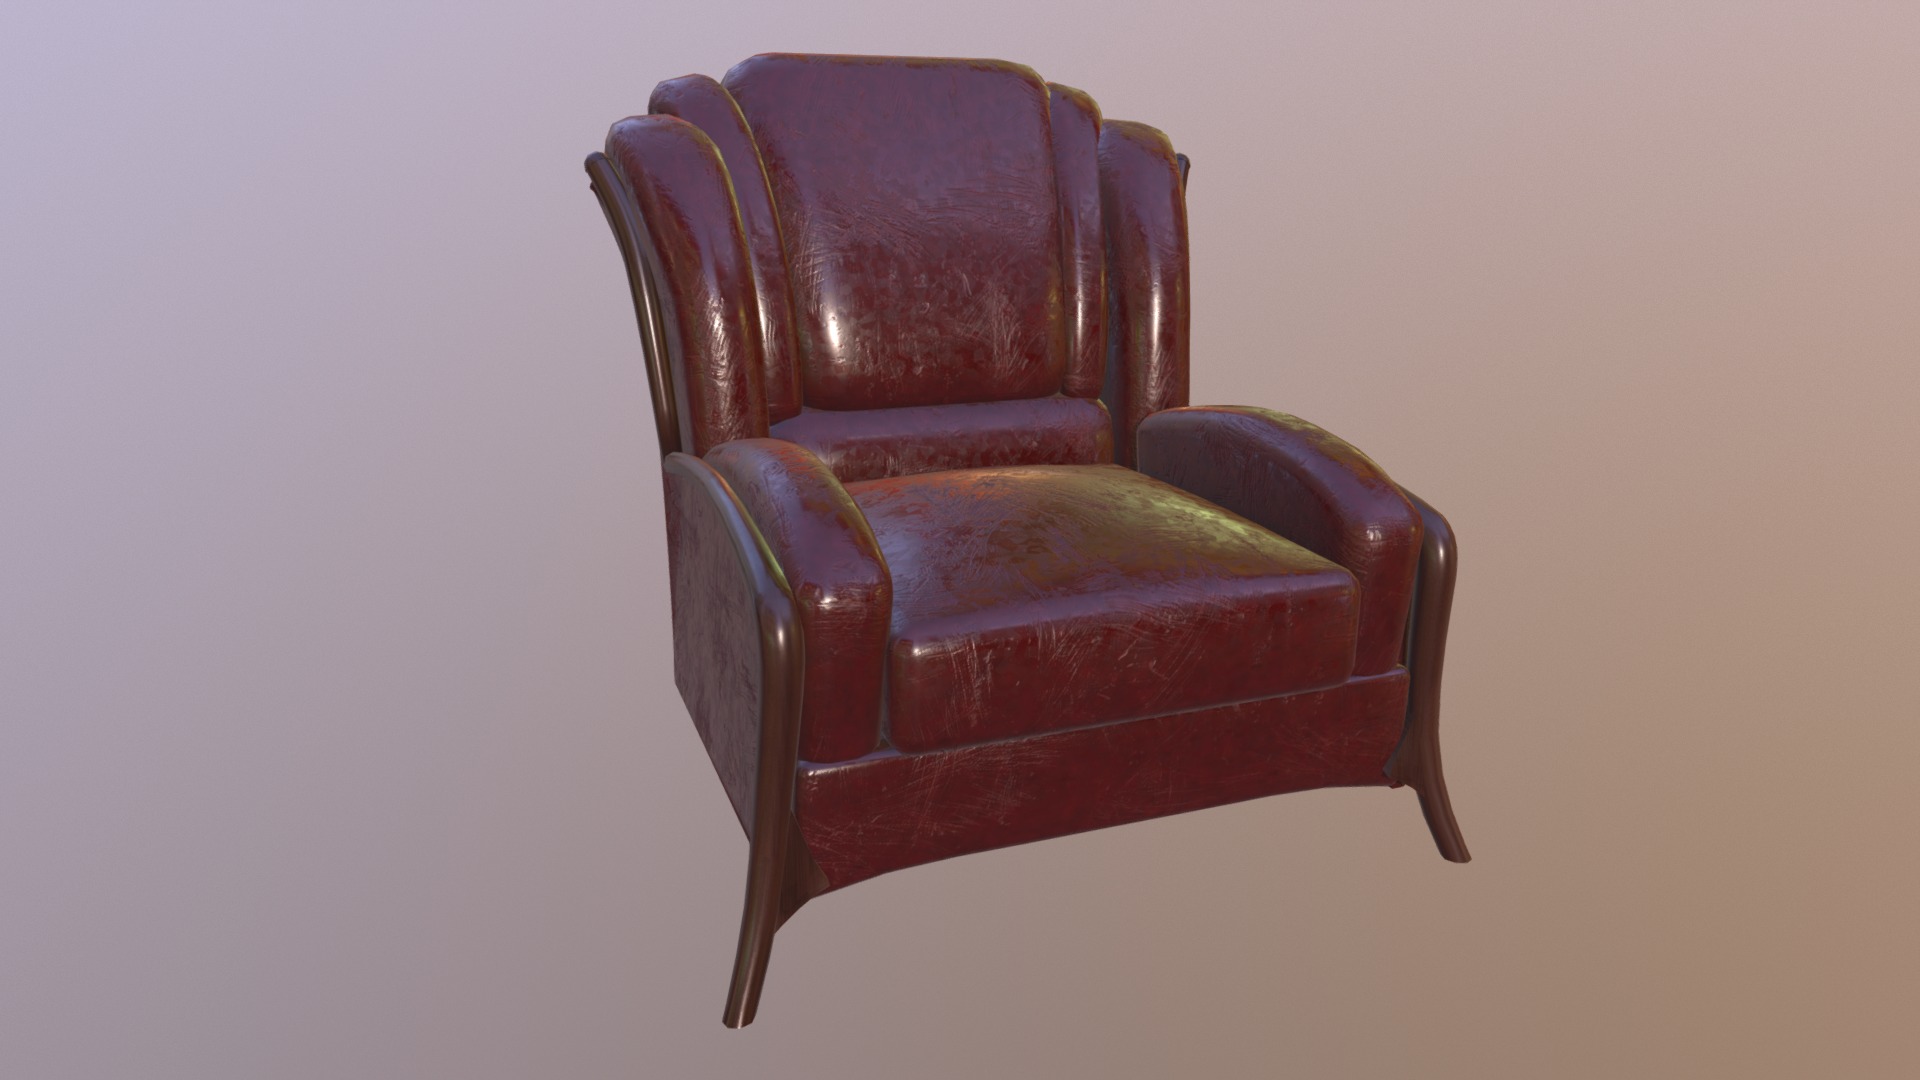 3D model Leather chair - This is a 3D model of the Leather chair. The 3D model is about a brown chair with a cushion.